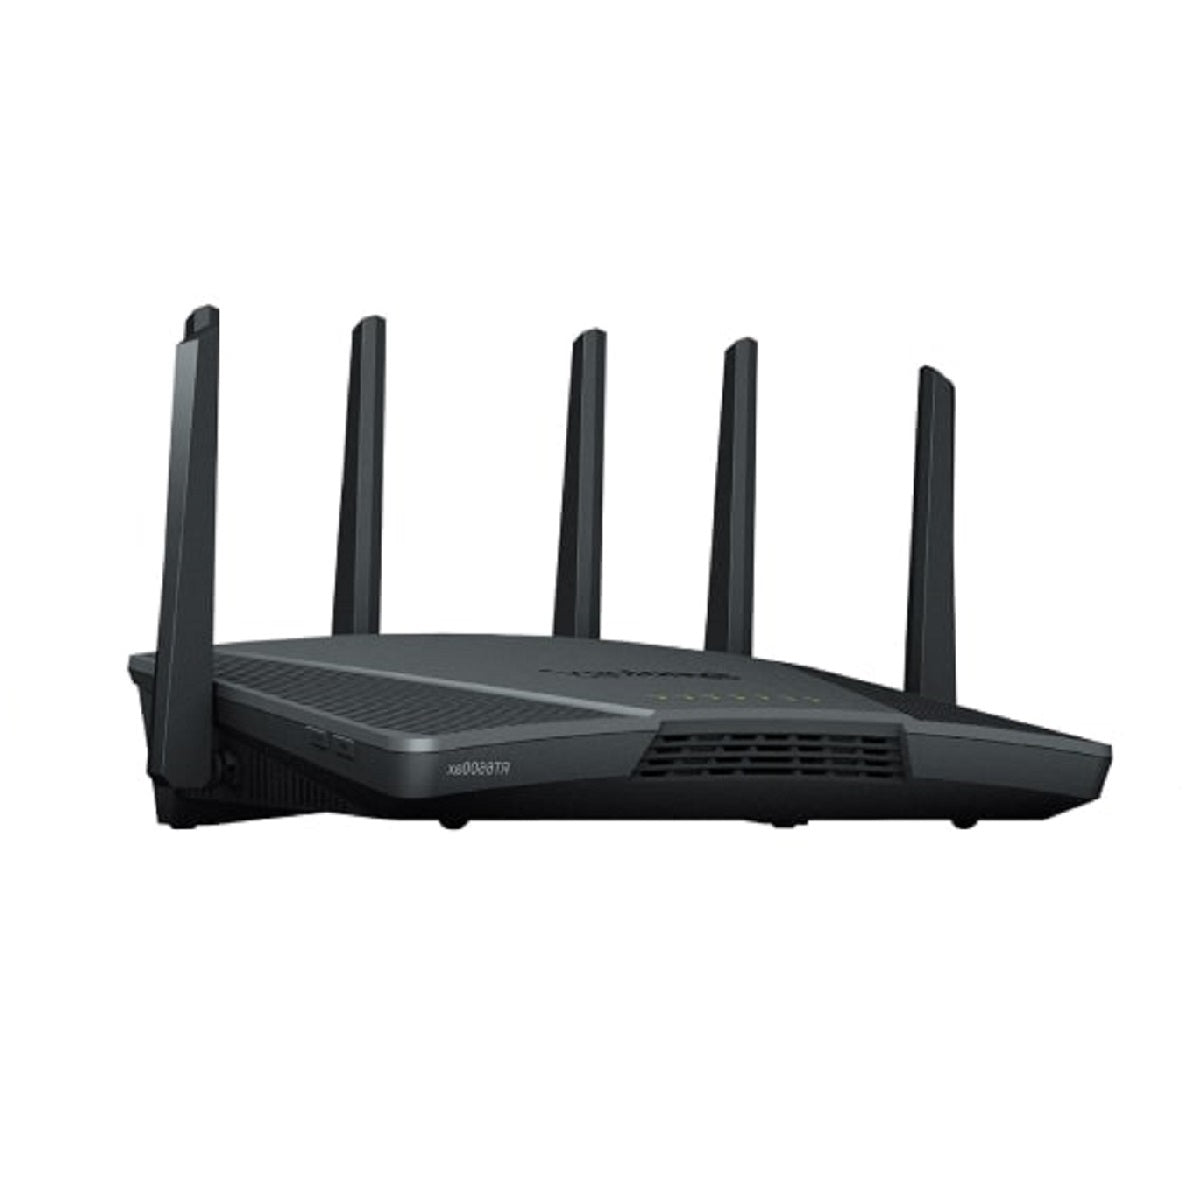 Synology RT6600AX Tri-Band WiFi 6 Router